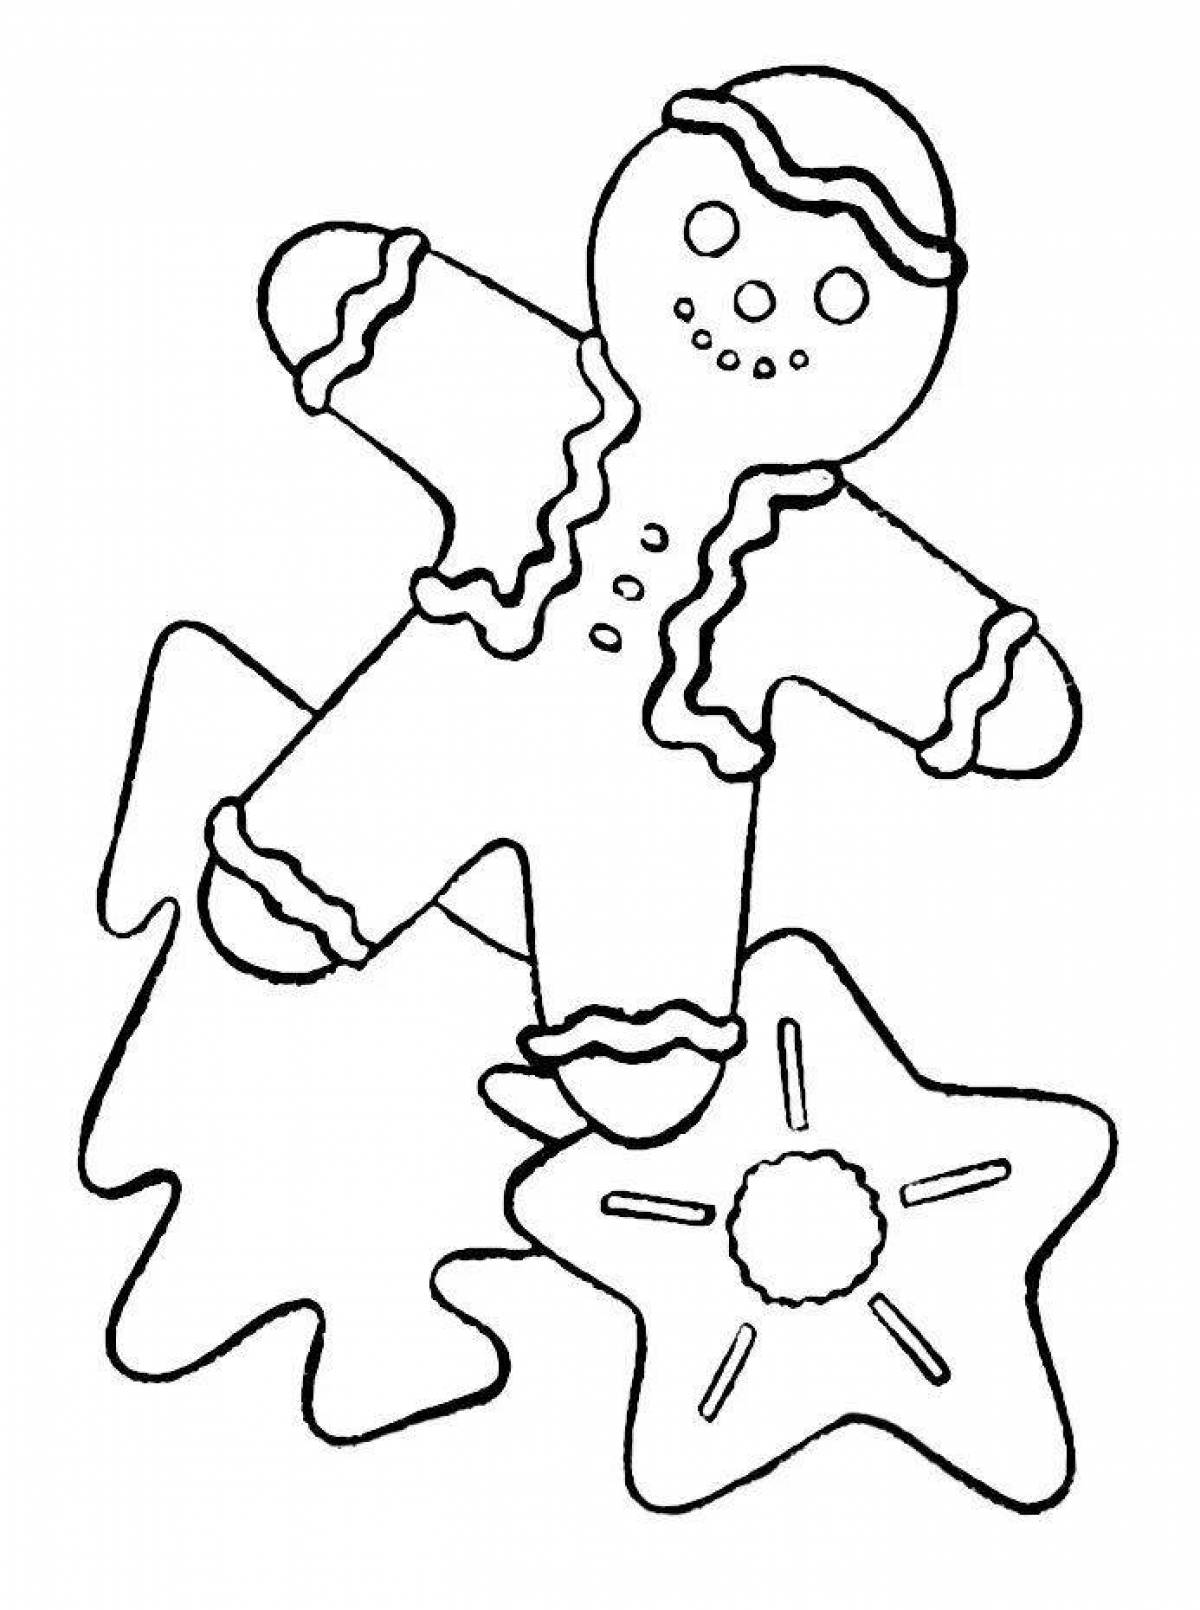 Cute gingerbread coloring for kids